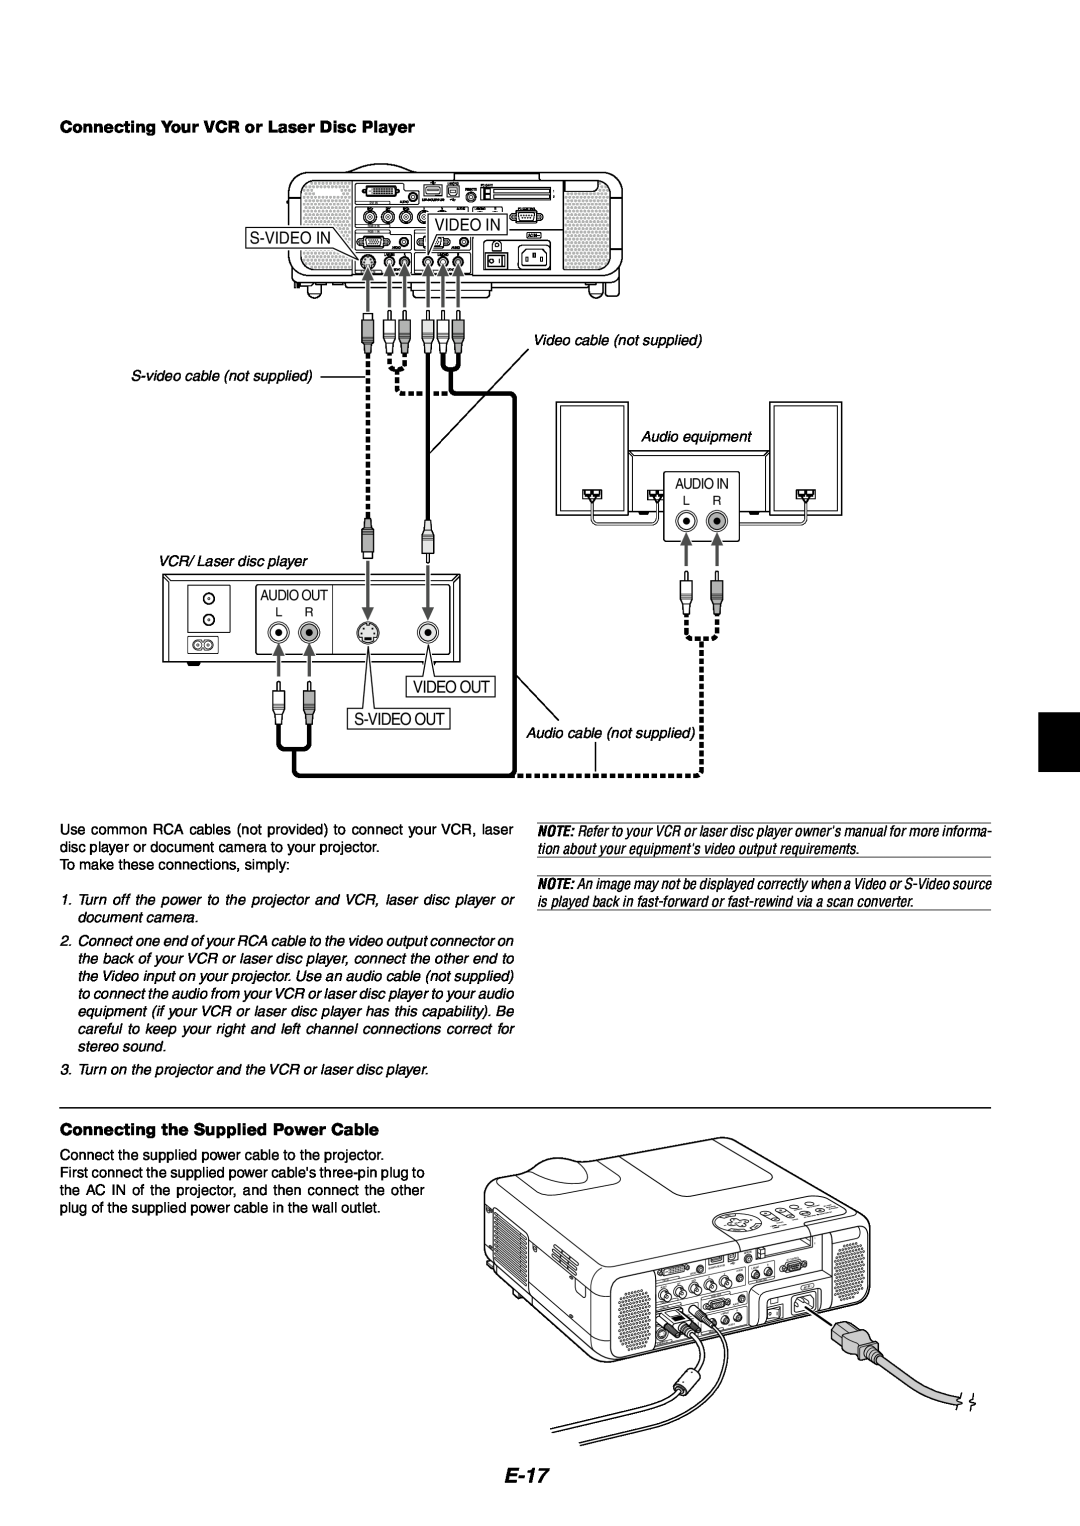 NEC MT1060 user manual E-17, Connecting Your VCR or Laser Disc Player, Connecting the Supplied Power Cable 